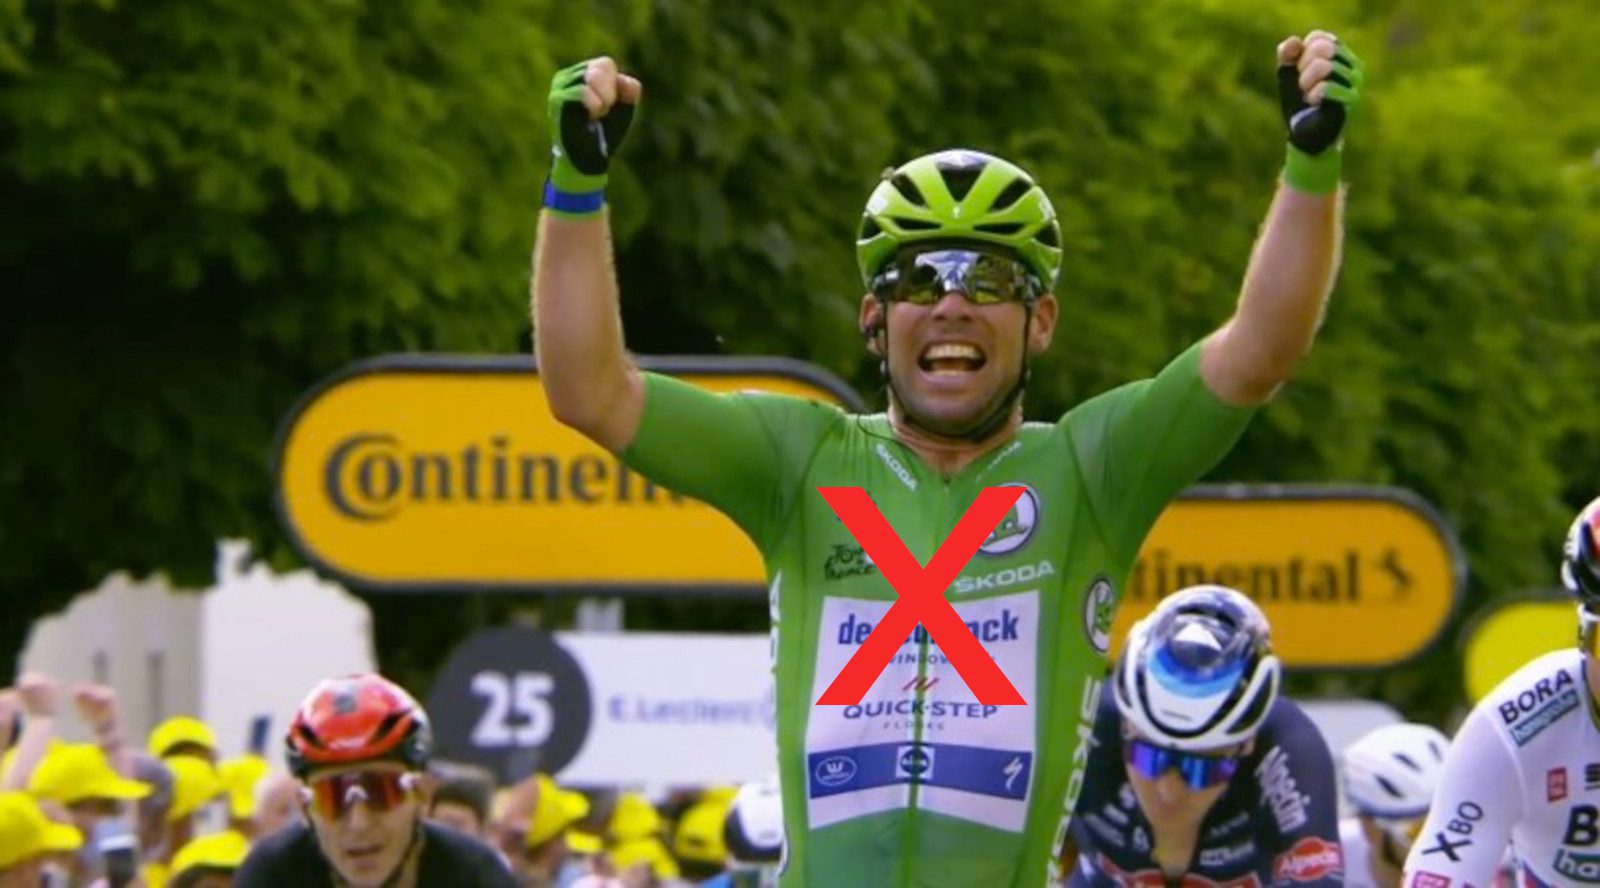 There’s a new green jersey at the Tour de France and not everyone loves